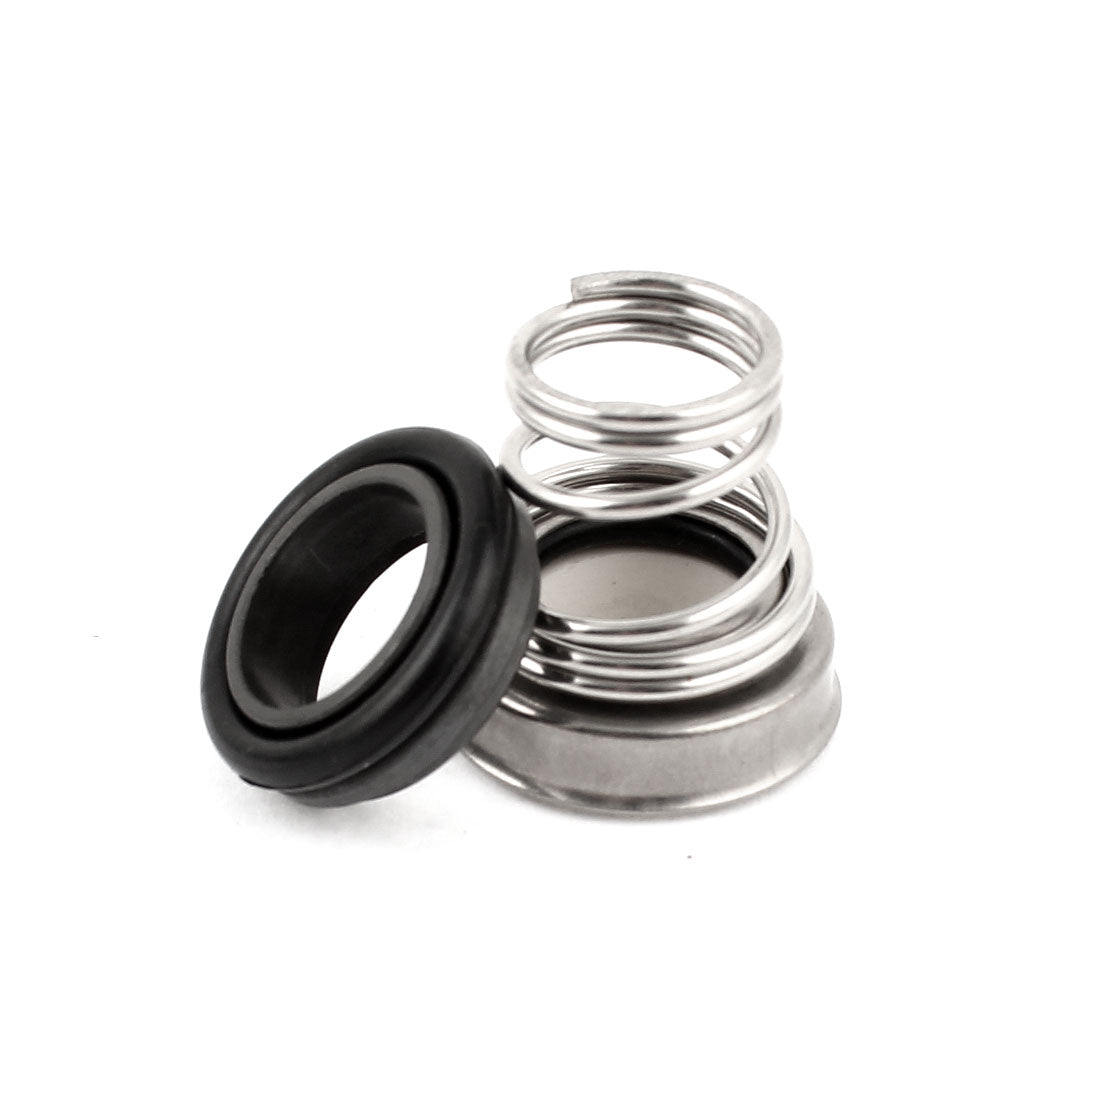 uxcell Uxcell Spring Coil Ceramic Ring Water Pump Mechanical Shaft Seal 16mm Inside Dia